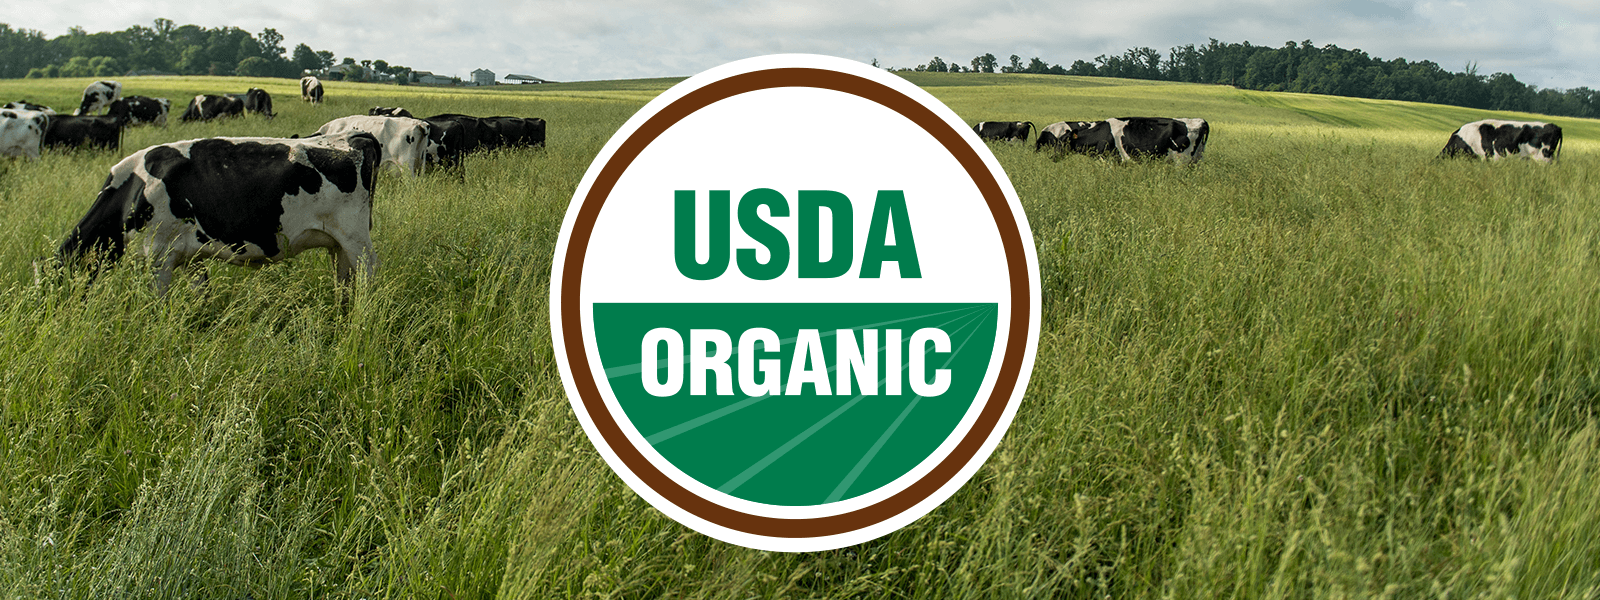 The USDA Organic seal overlaid on a photo of cows in long green pasture